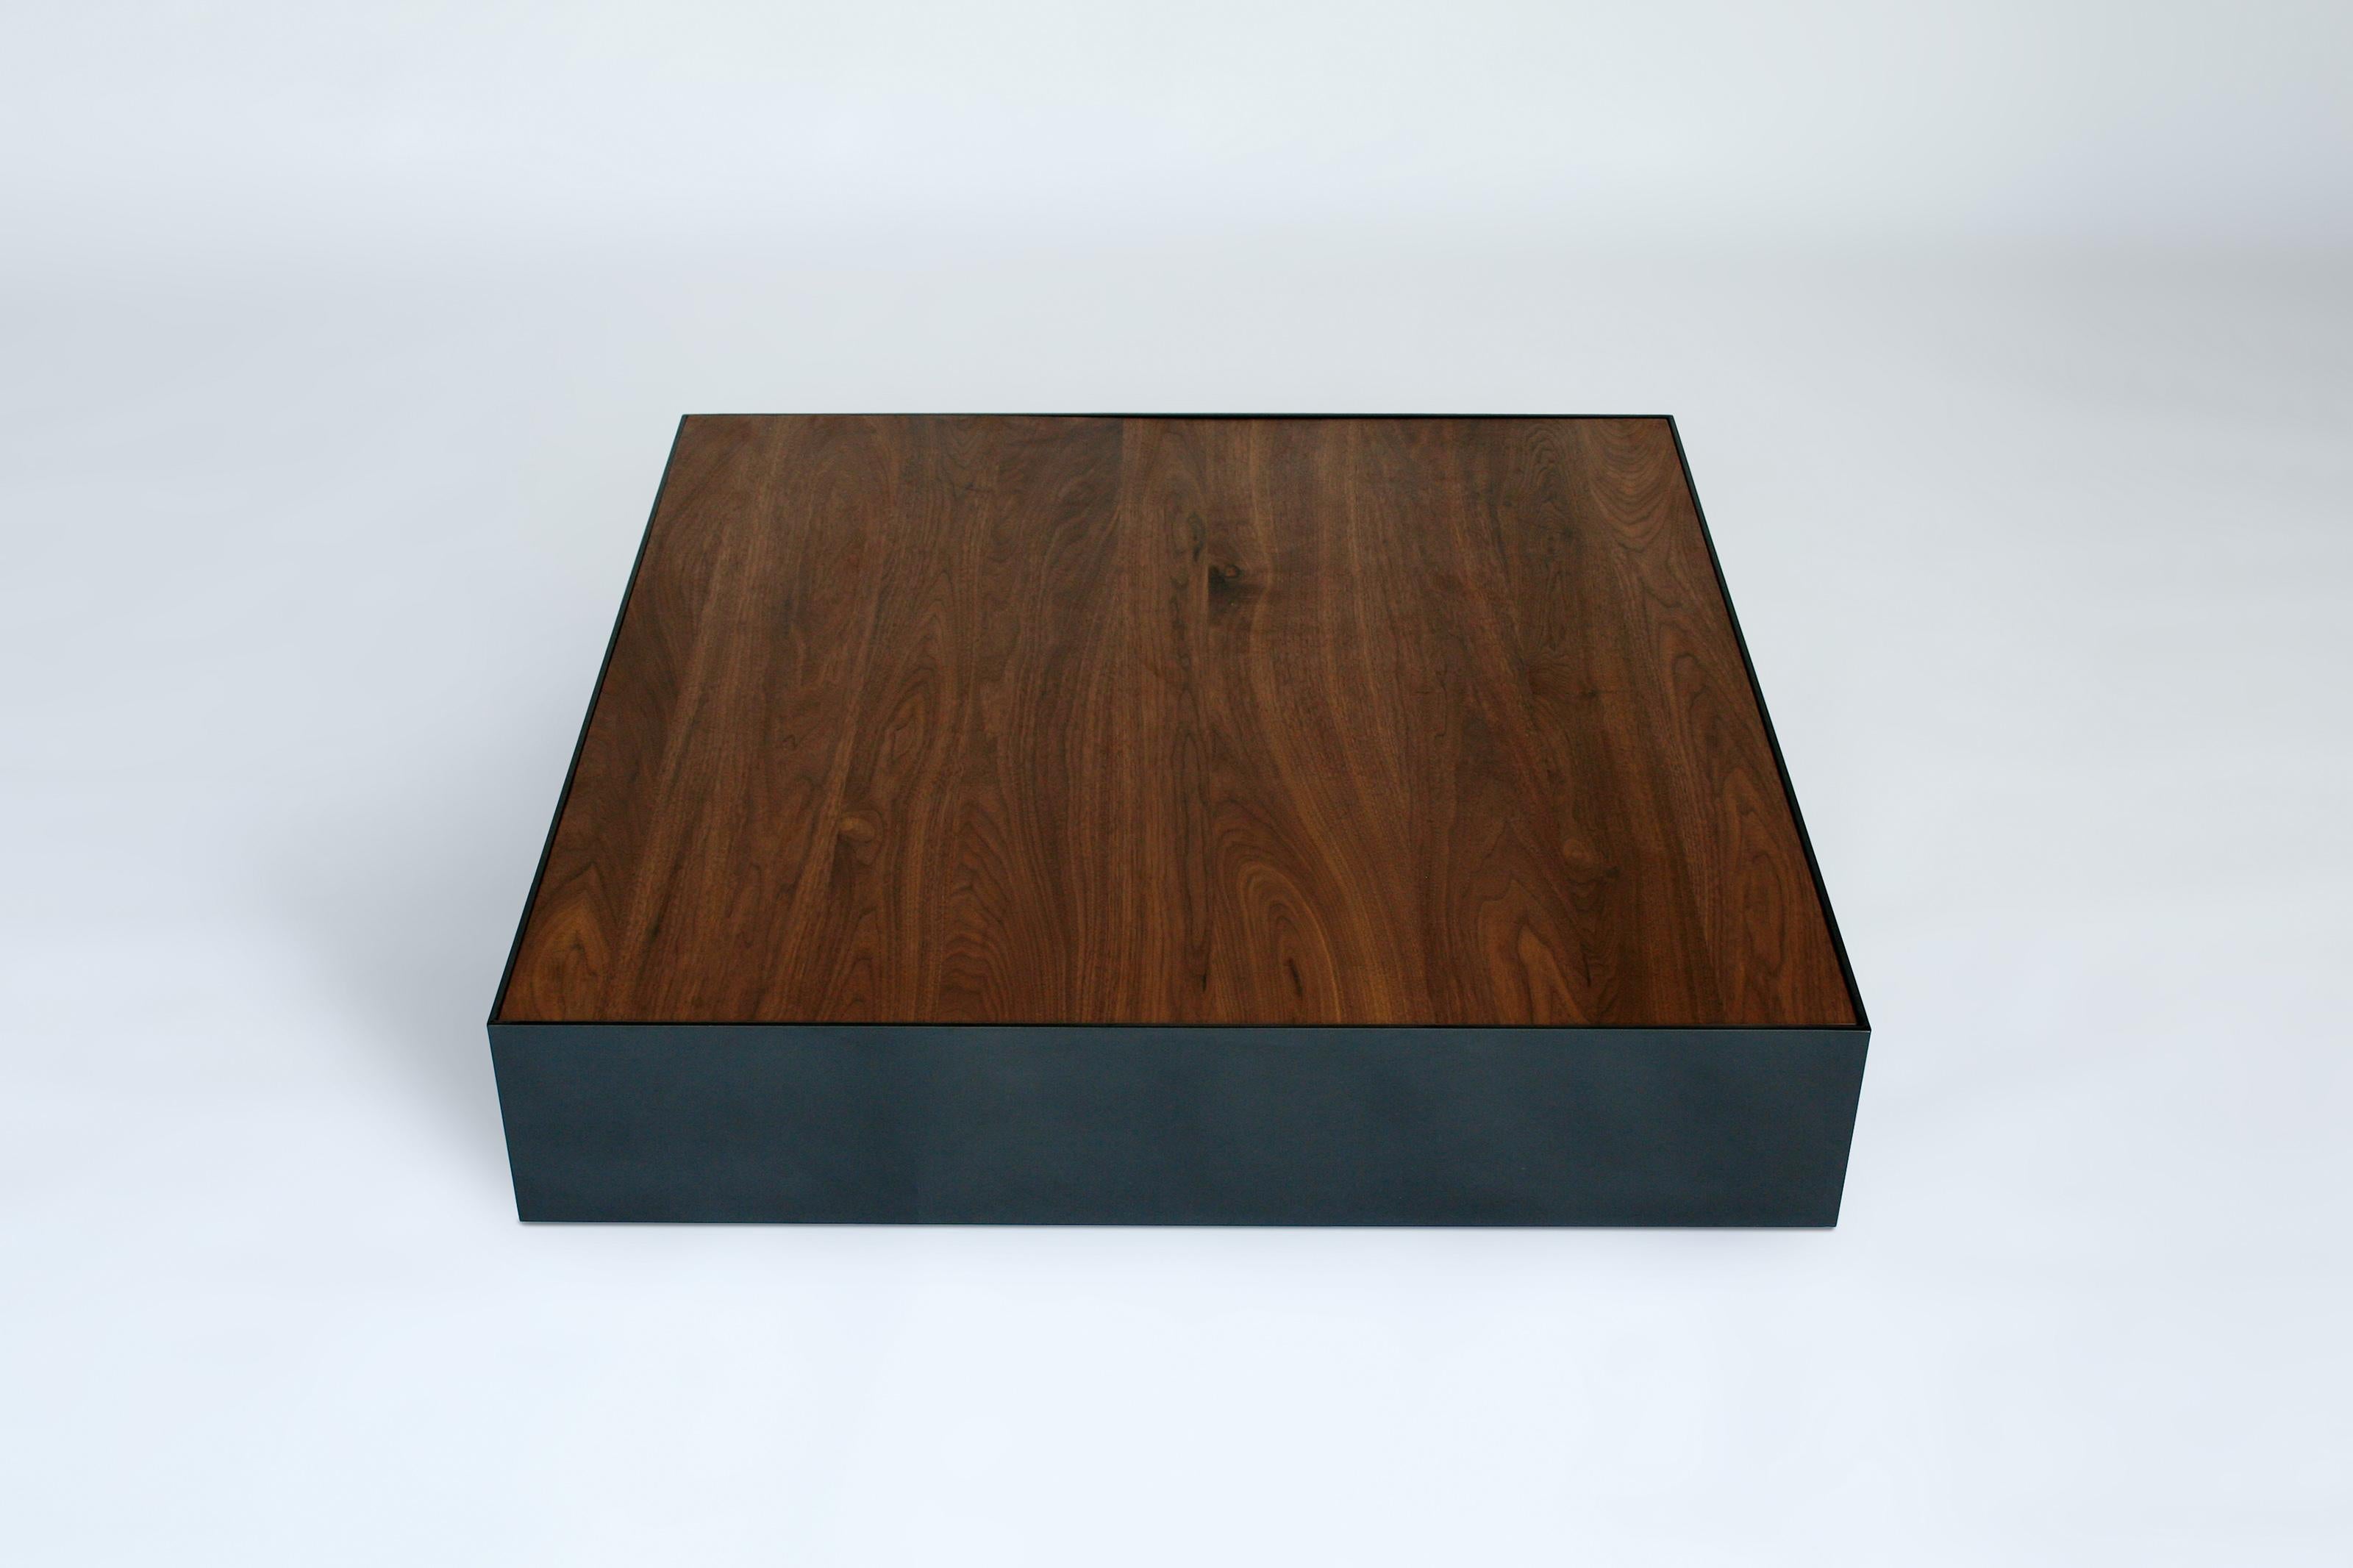 Walnut Ballot XL Coffee Table by Phase Design
Dimensions: D 106,7 x W 106,7 x H 22,9 cm.
Materials: Walnut and black powder-coated metal.

Aluminum coffee table with solid wood top, available in walnut, white oak, or ebonized oak. Available in gloss